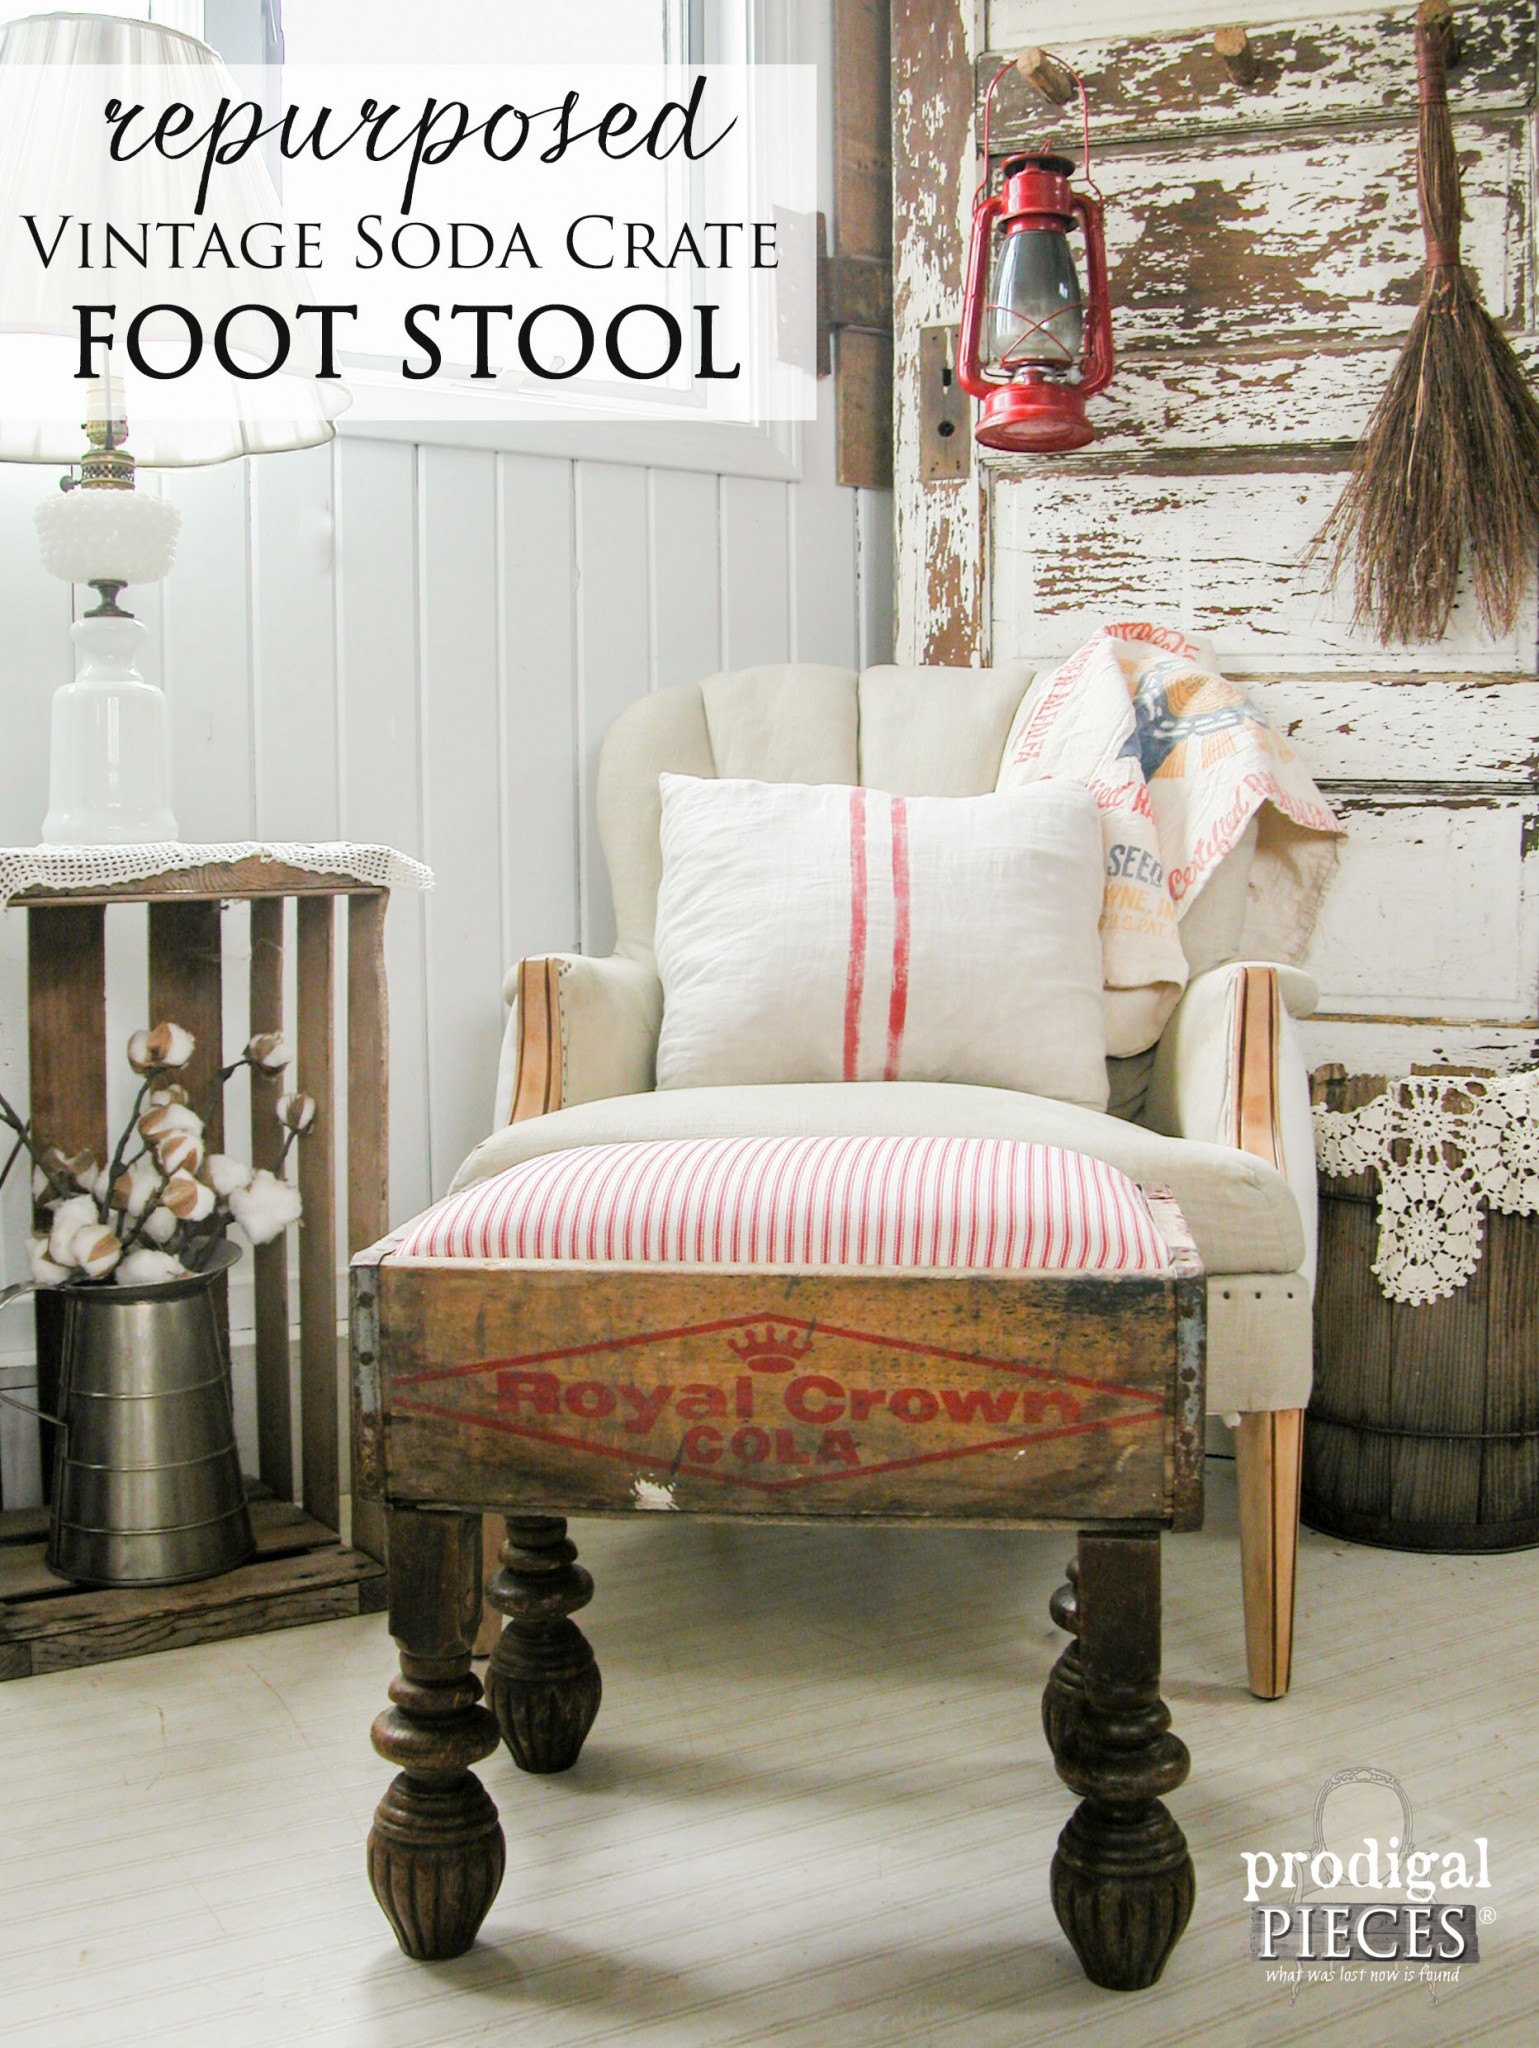 Vintage Soda Crate Repurposed into Foot Stool by Prodigal Pieces | www.prodigalpieces.com